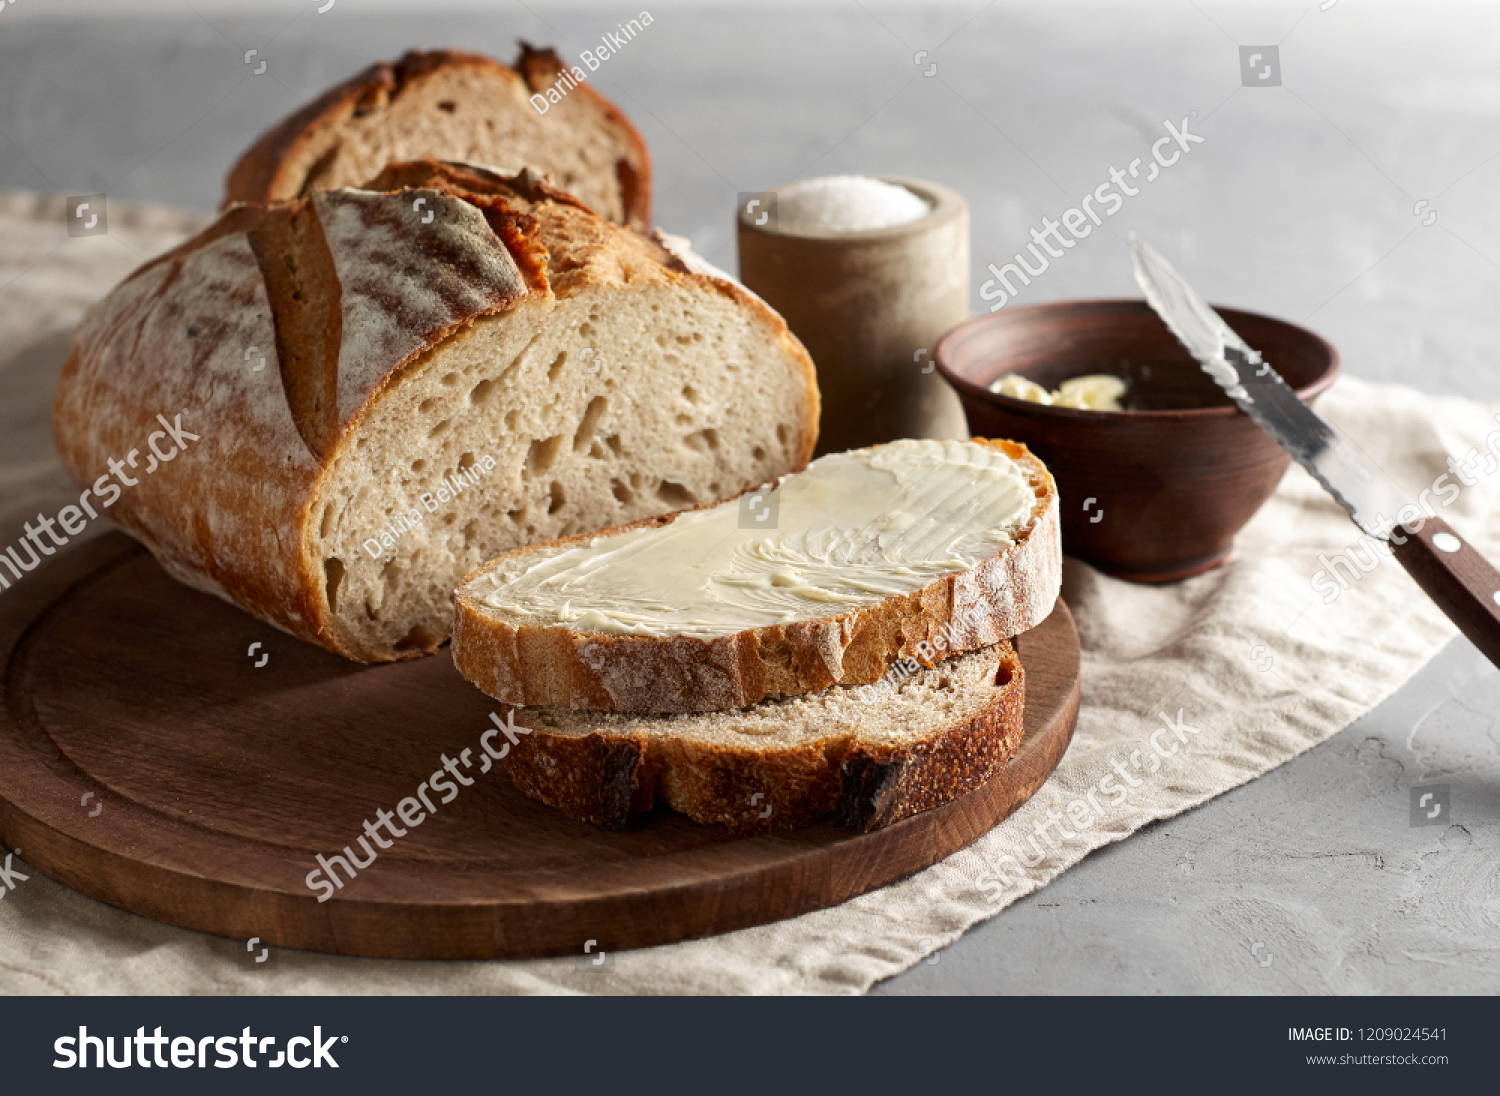 Artisan sliced toast bread with butter and sugar on wooden cutting board. Simple breakfast on grey concrete background. Closeup view #1209024541